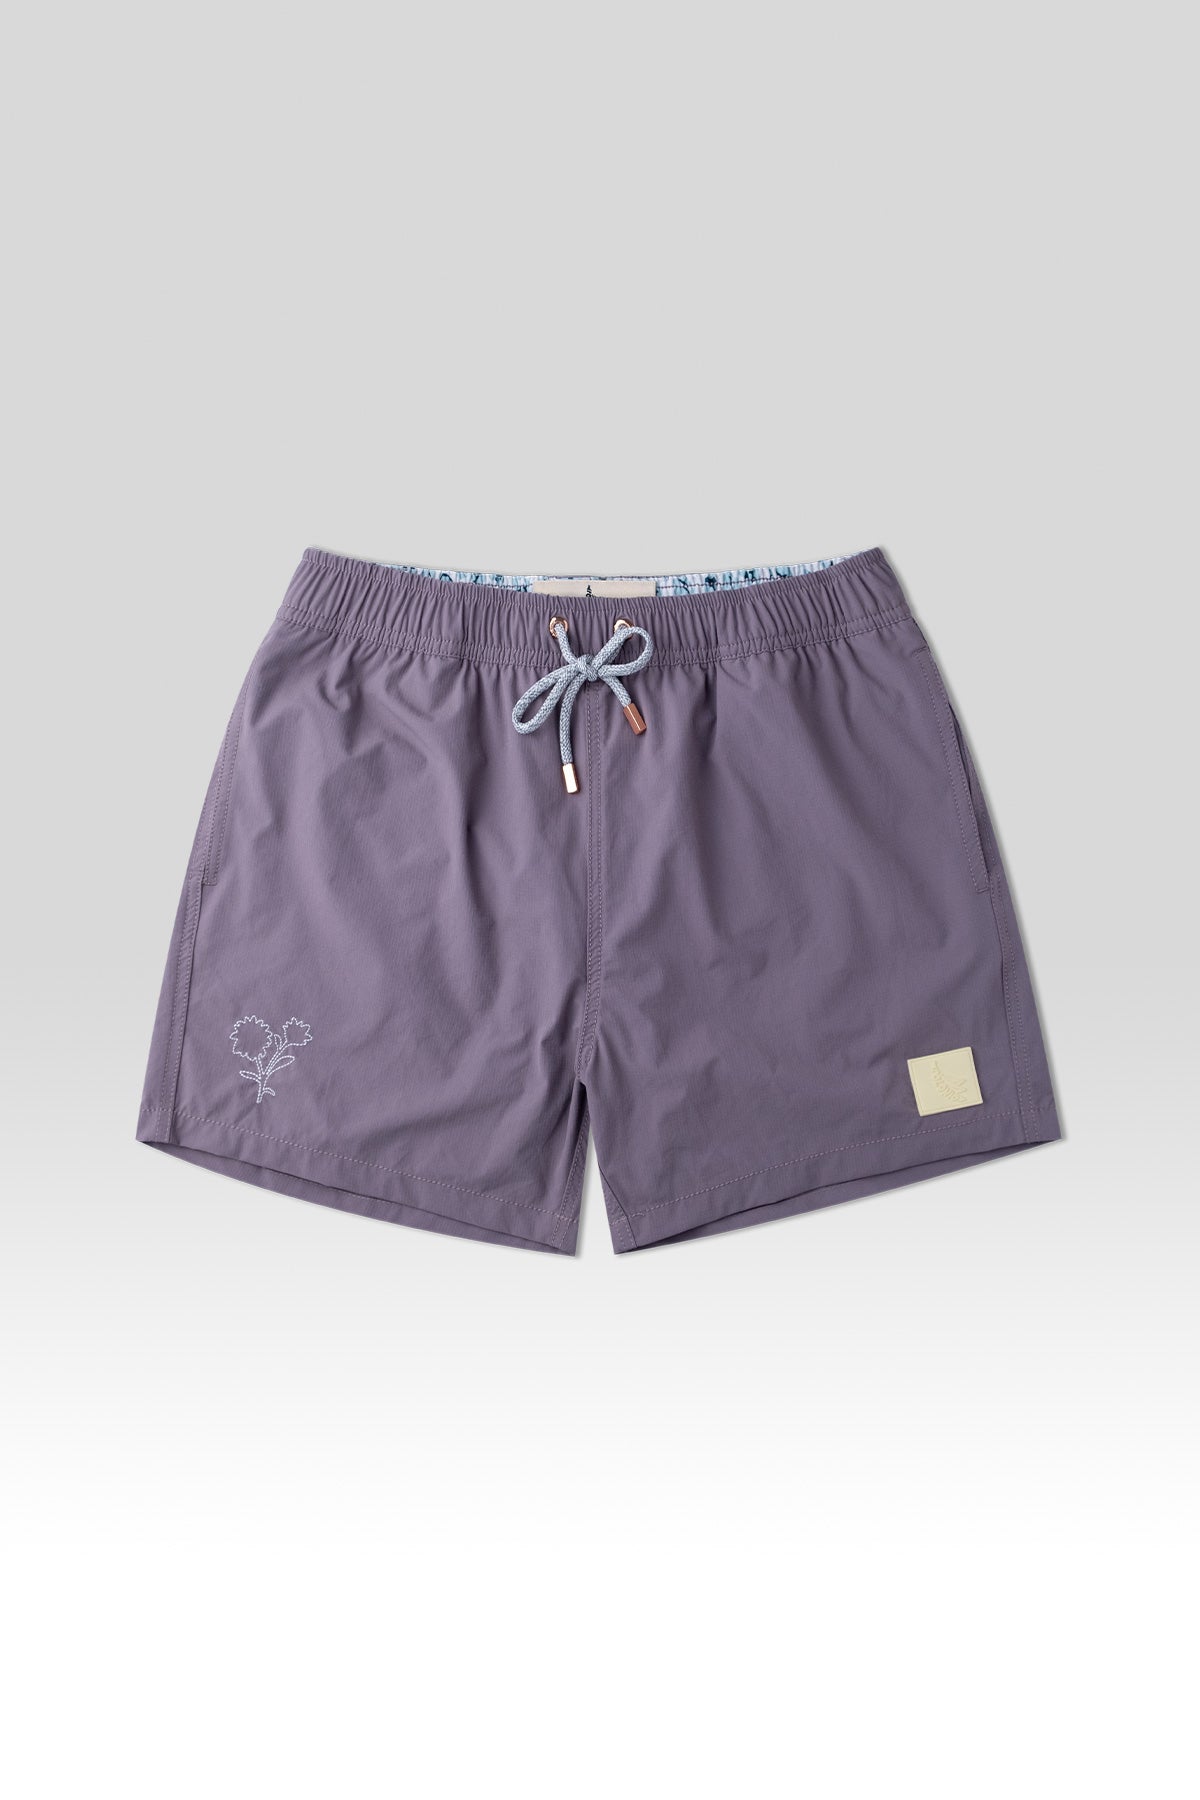 Embroidered Classic Swim Trunks Violet - Polonio